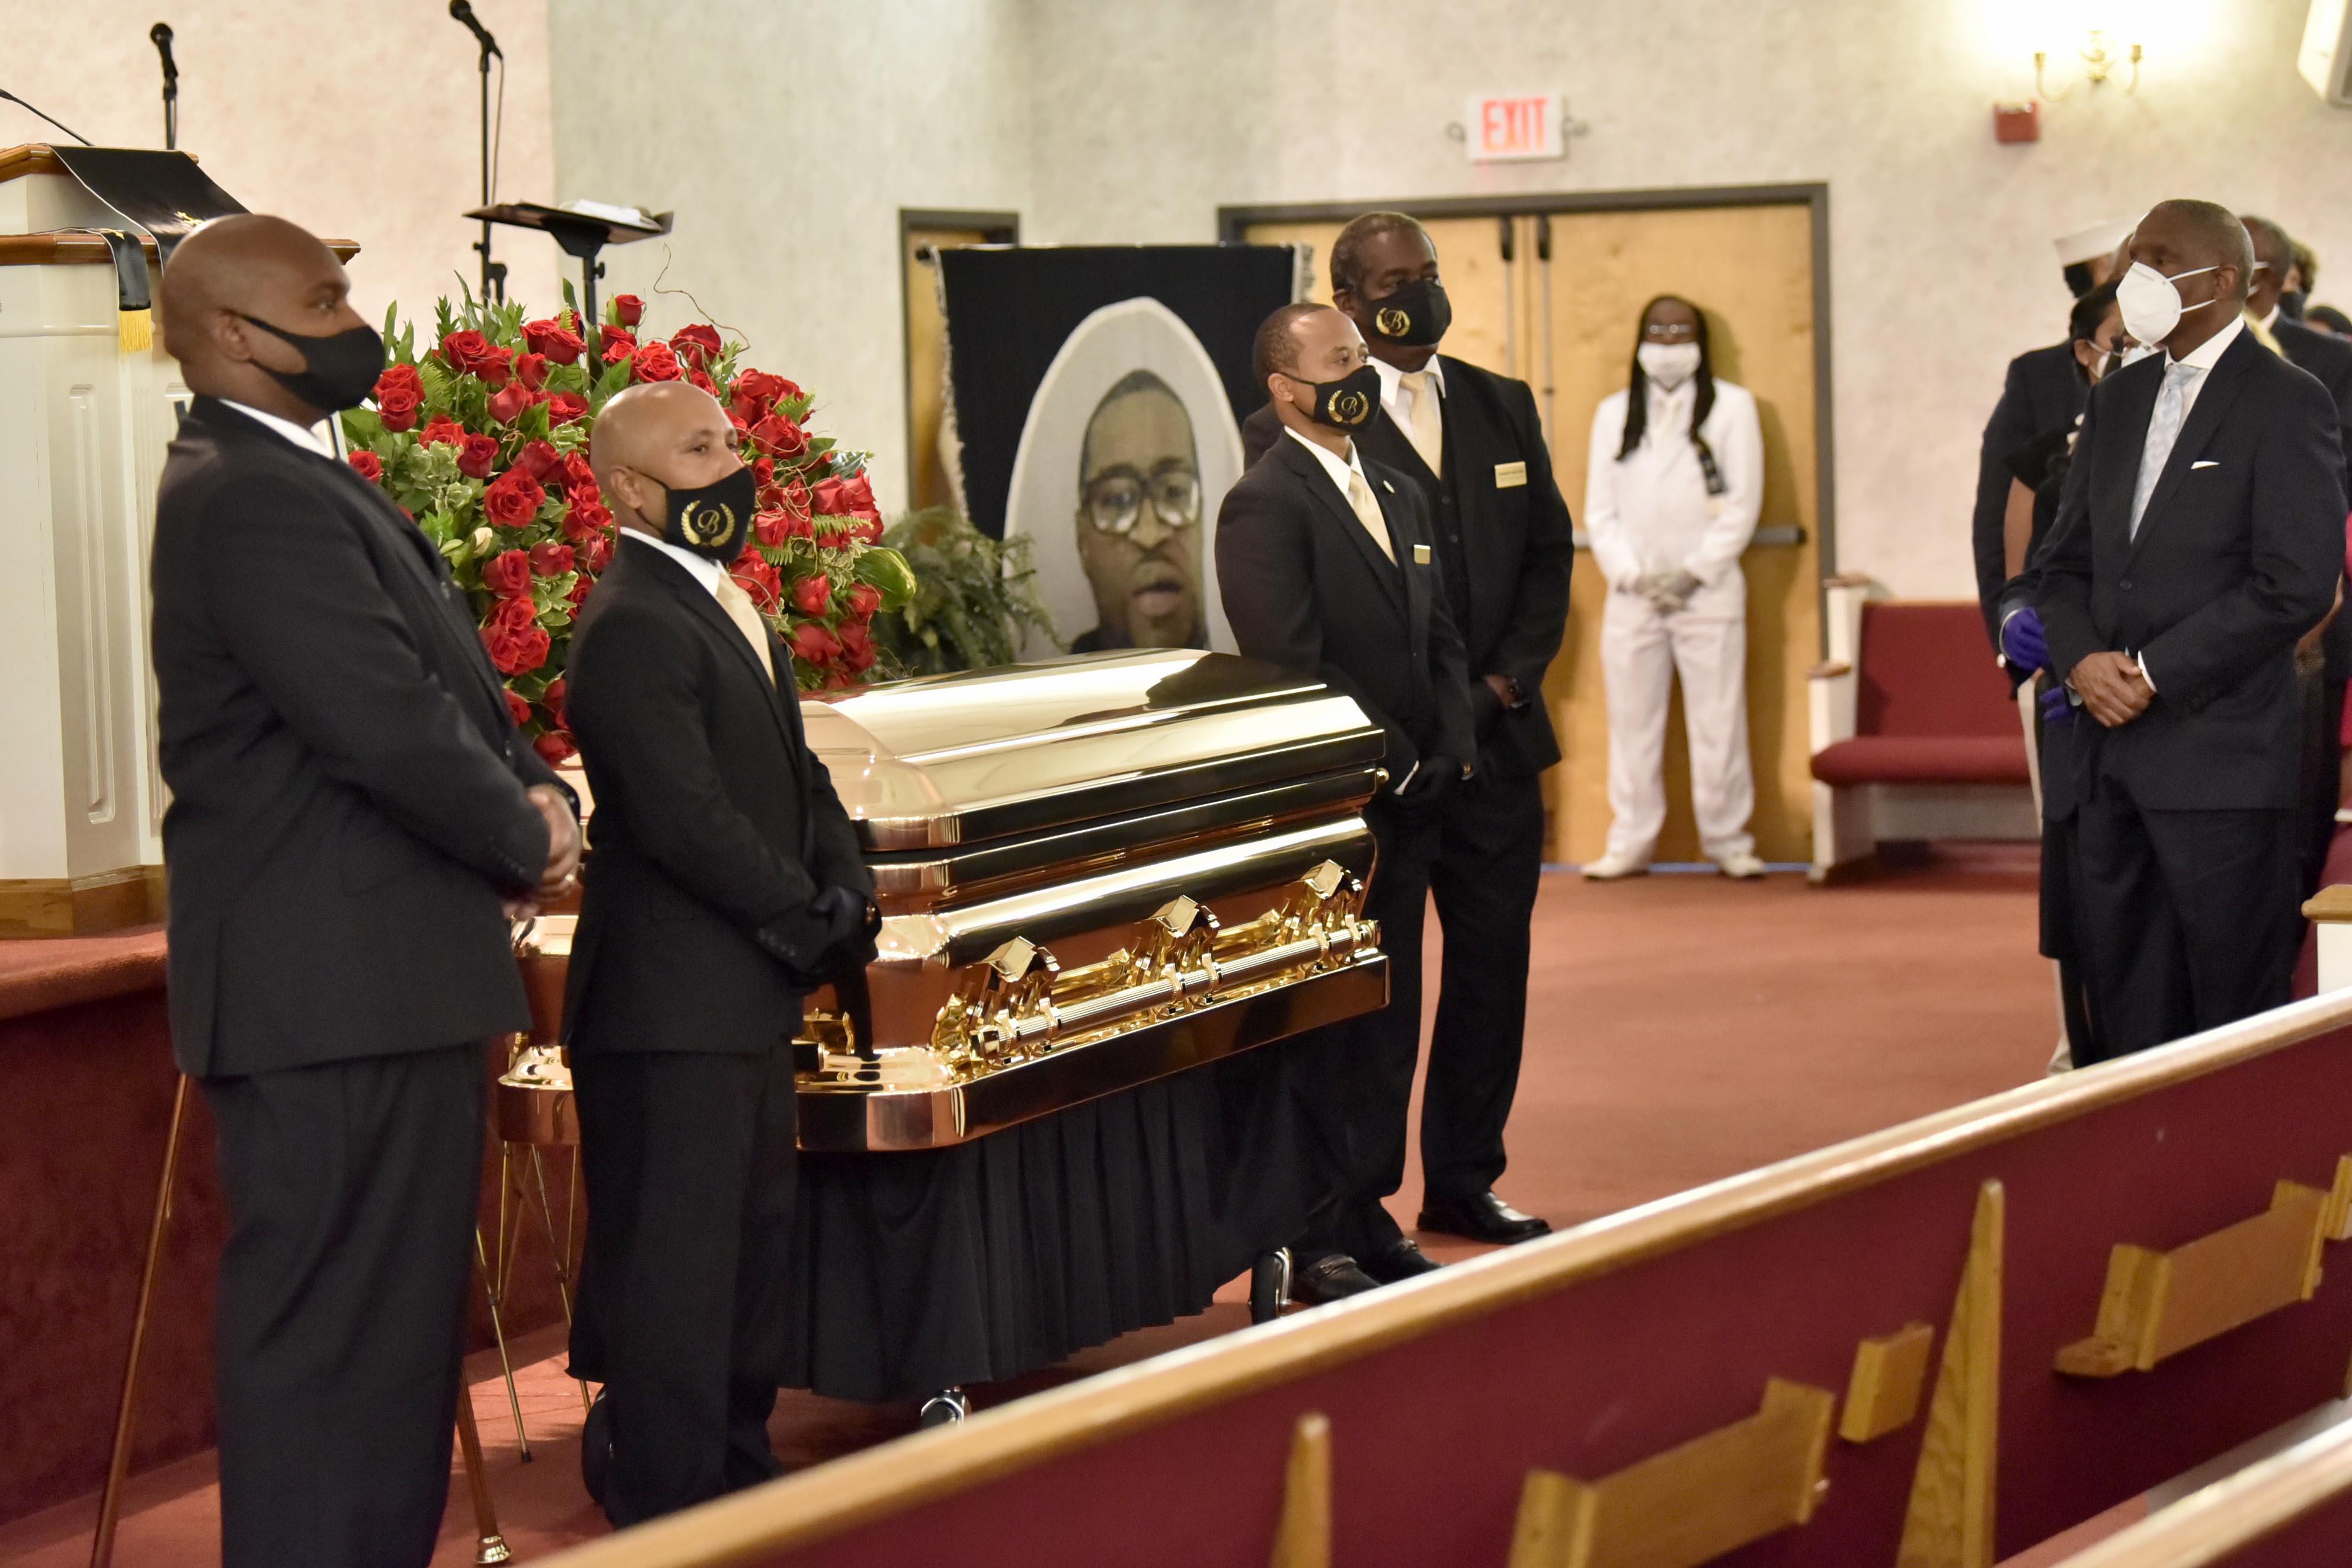 Pallbearers stand next to the remains of George Floyd at the service